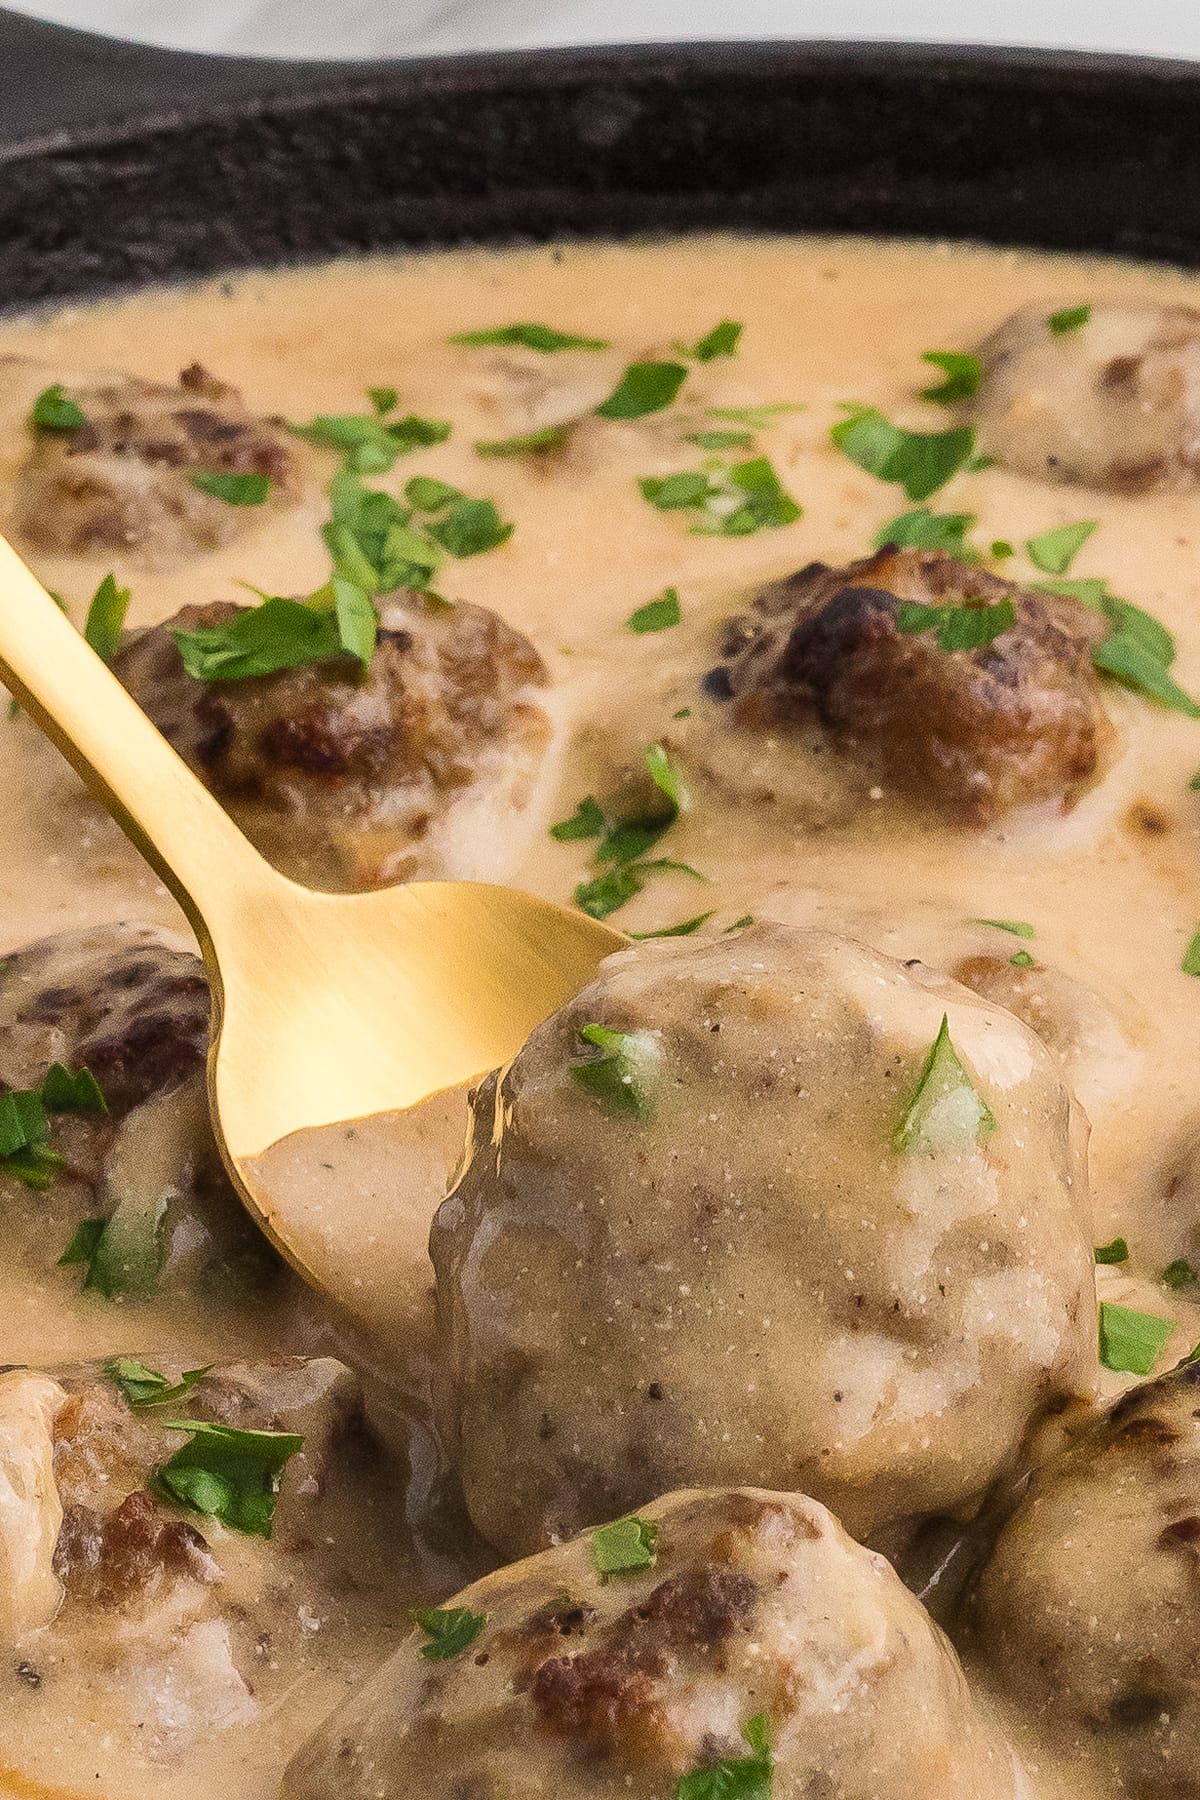 A spoon pulling a Swedish meatball from a skillet